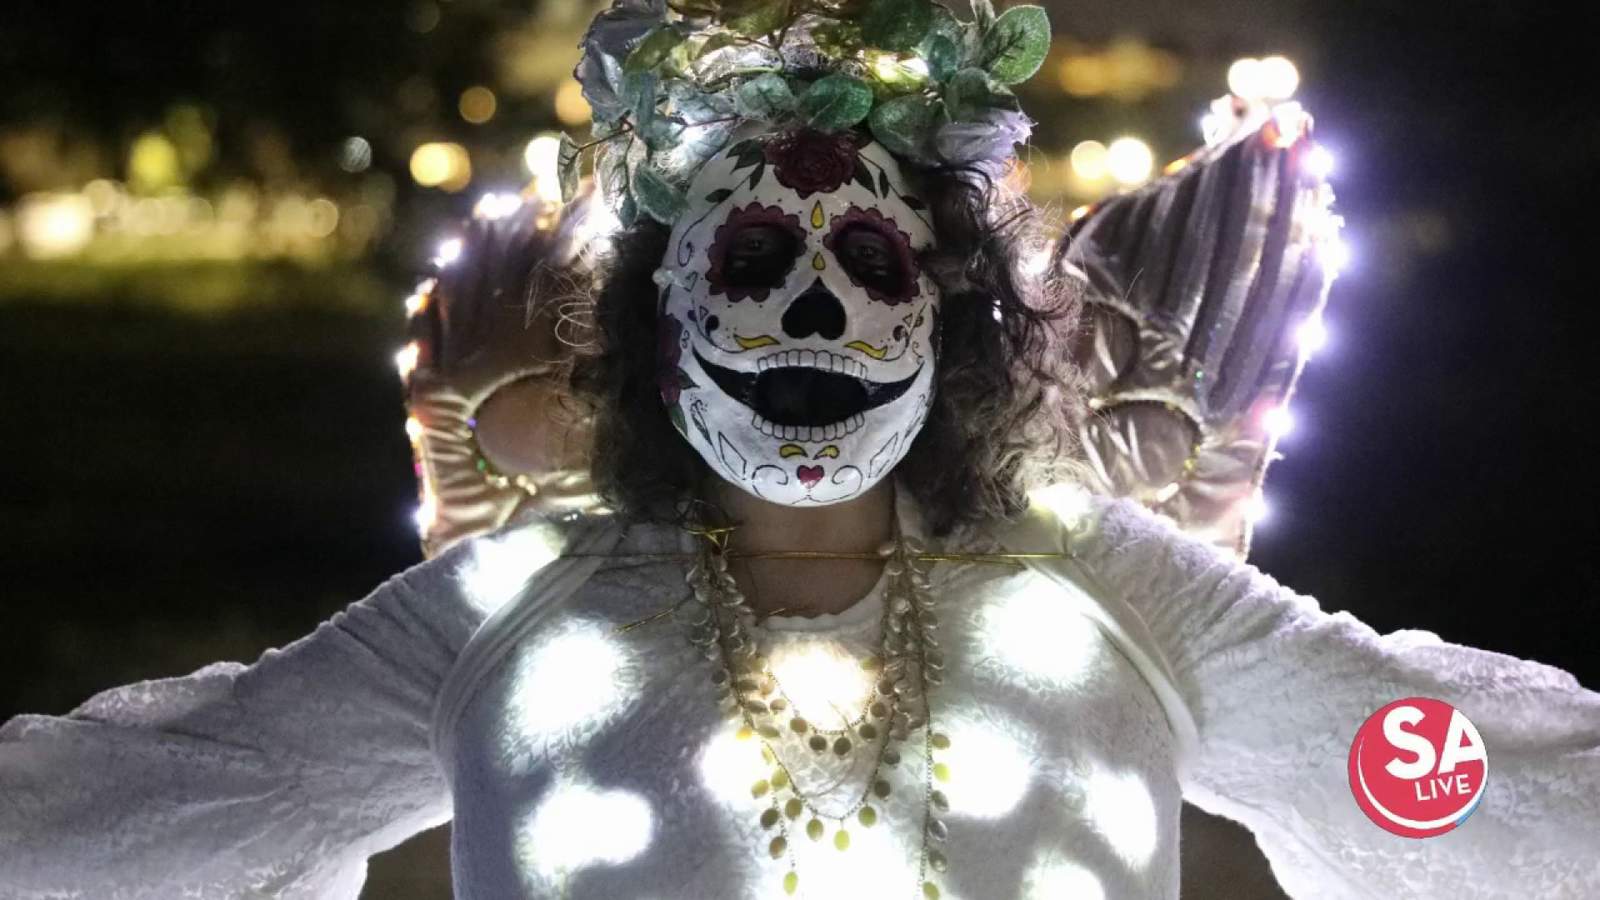 Urban-15 dedicates Day of the Dead performances to COVID-19 victims